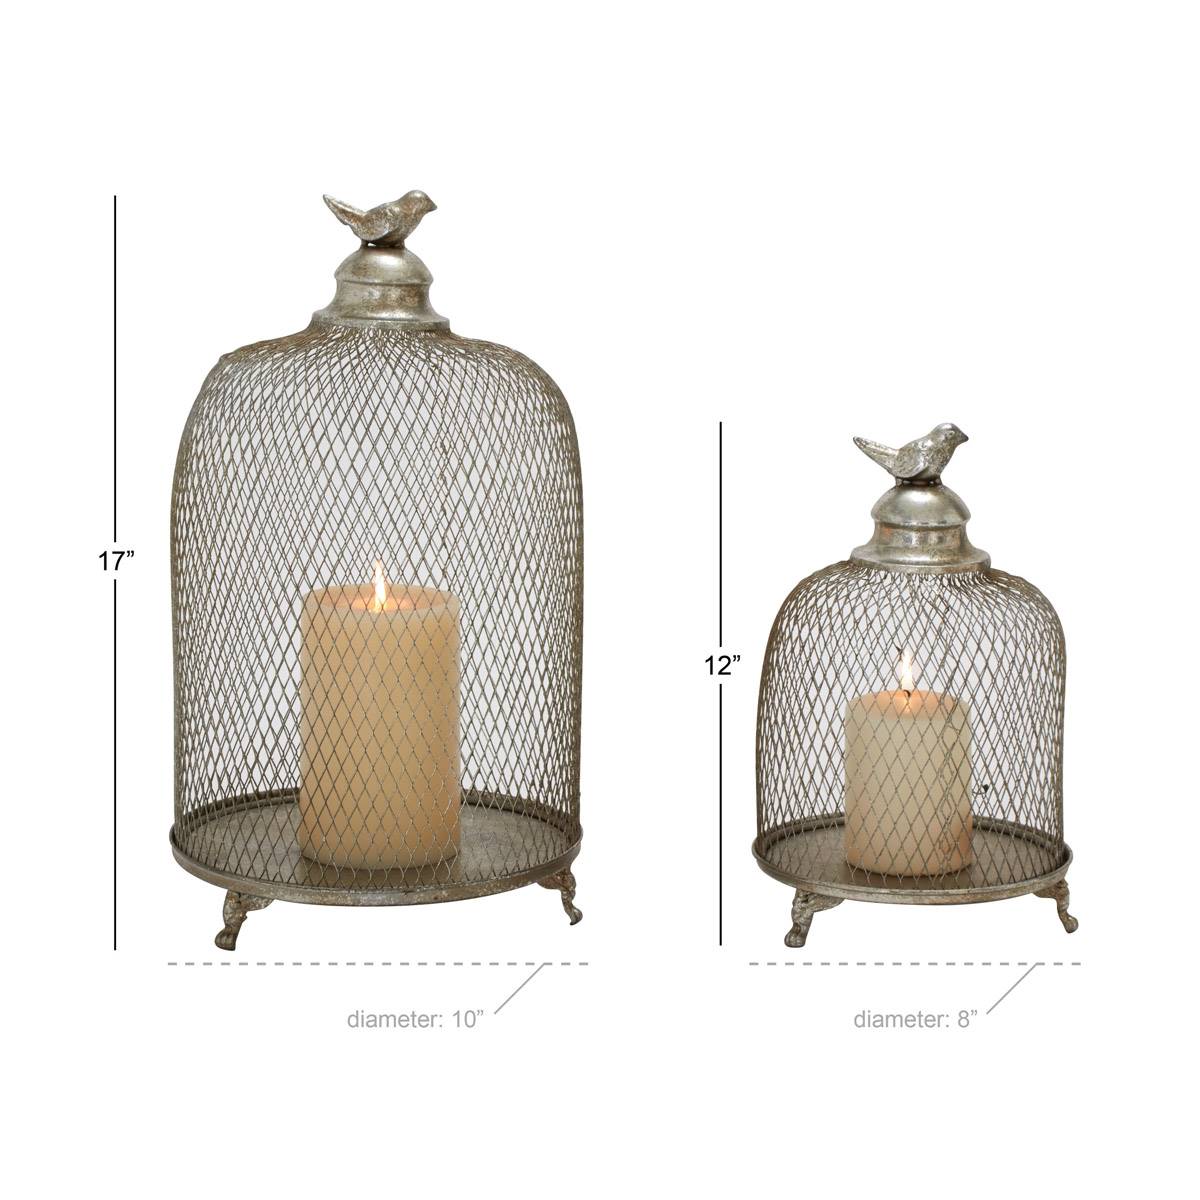 9th & Pike(R) Metal Cloche Candle Holder Lanterns - Set Of 2